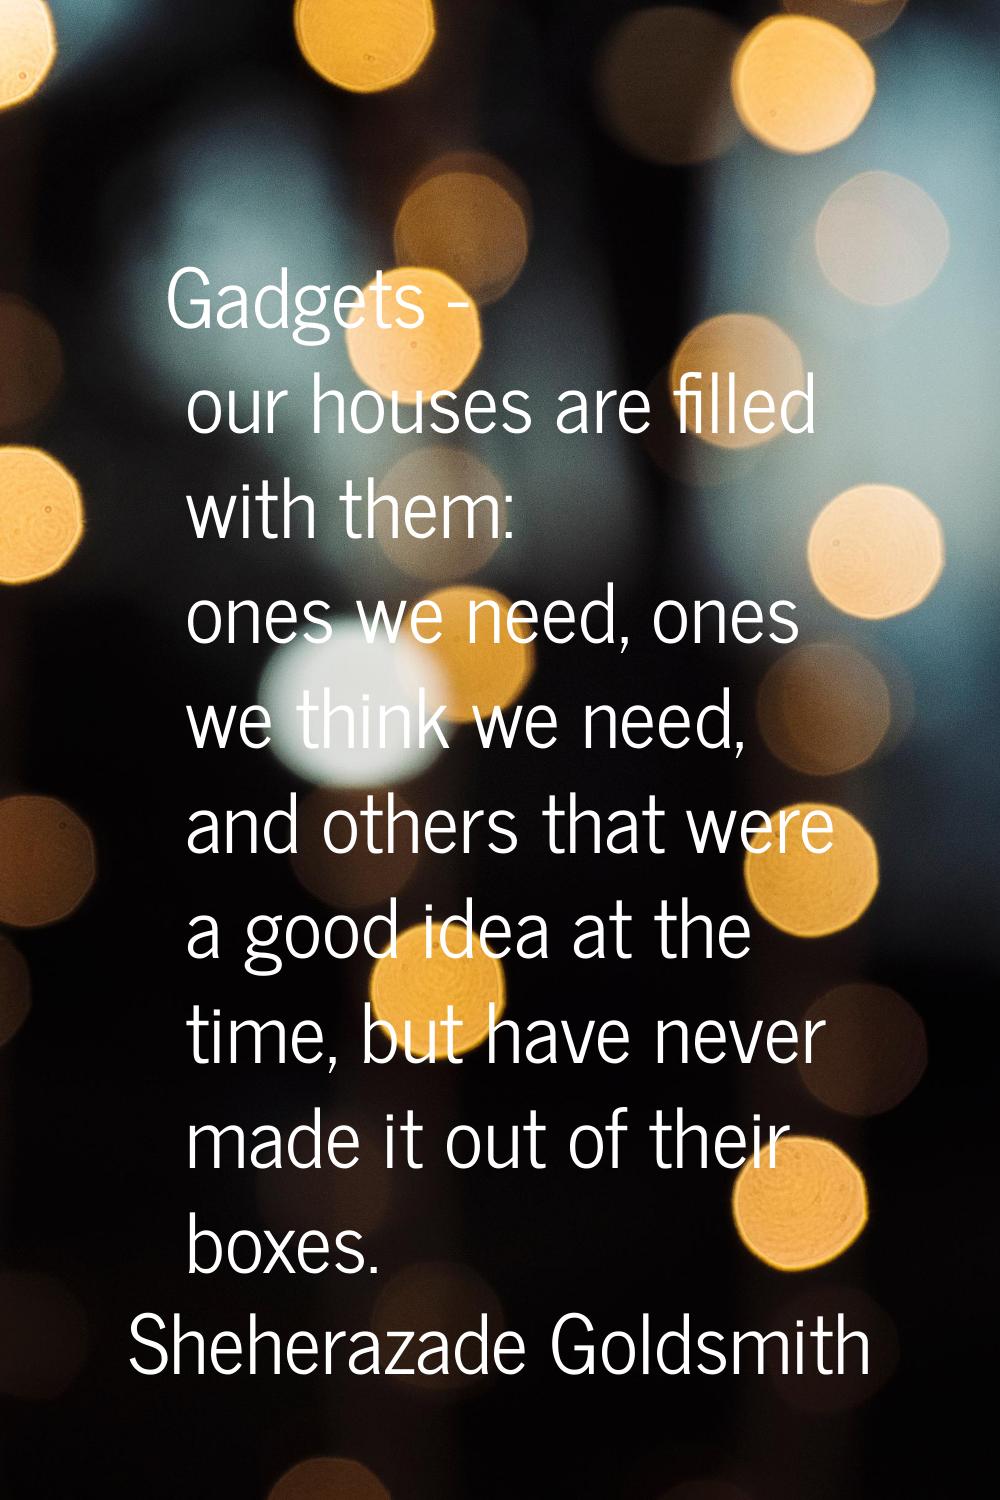 Gadgets - our houses are filled with them: ones we need, ones we think we need, and others that wer